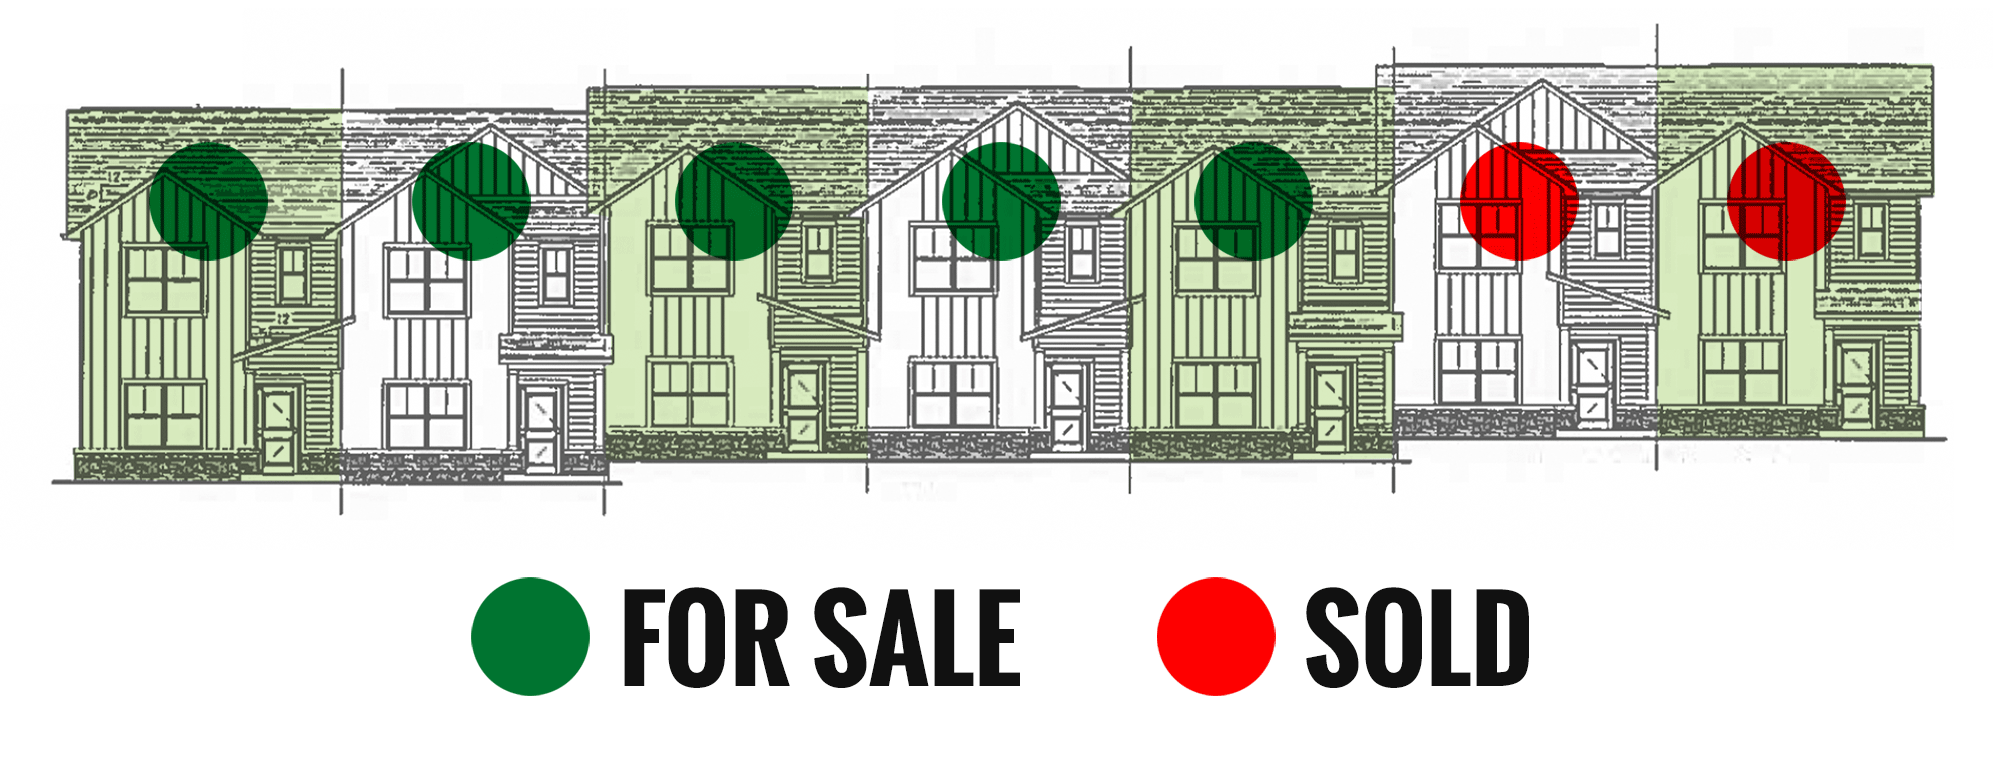 Townhomes for sale vs. sold